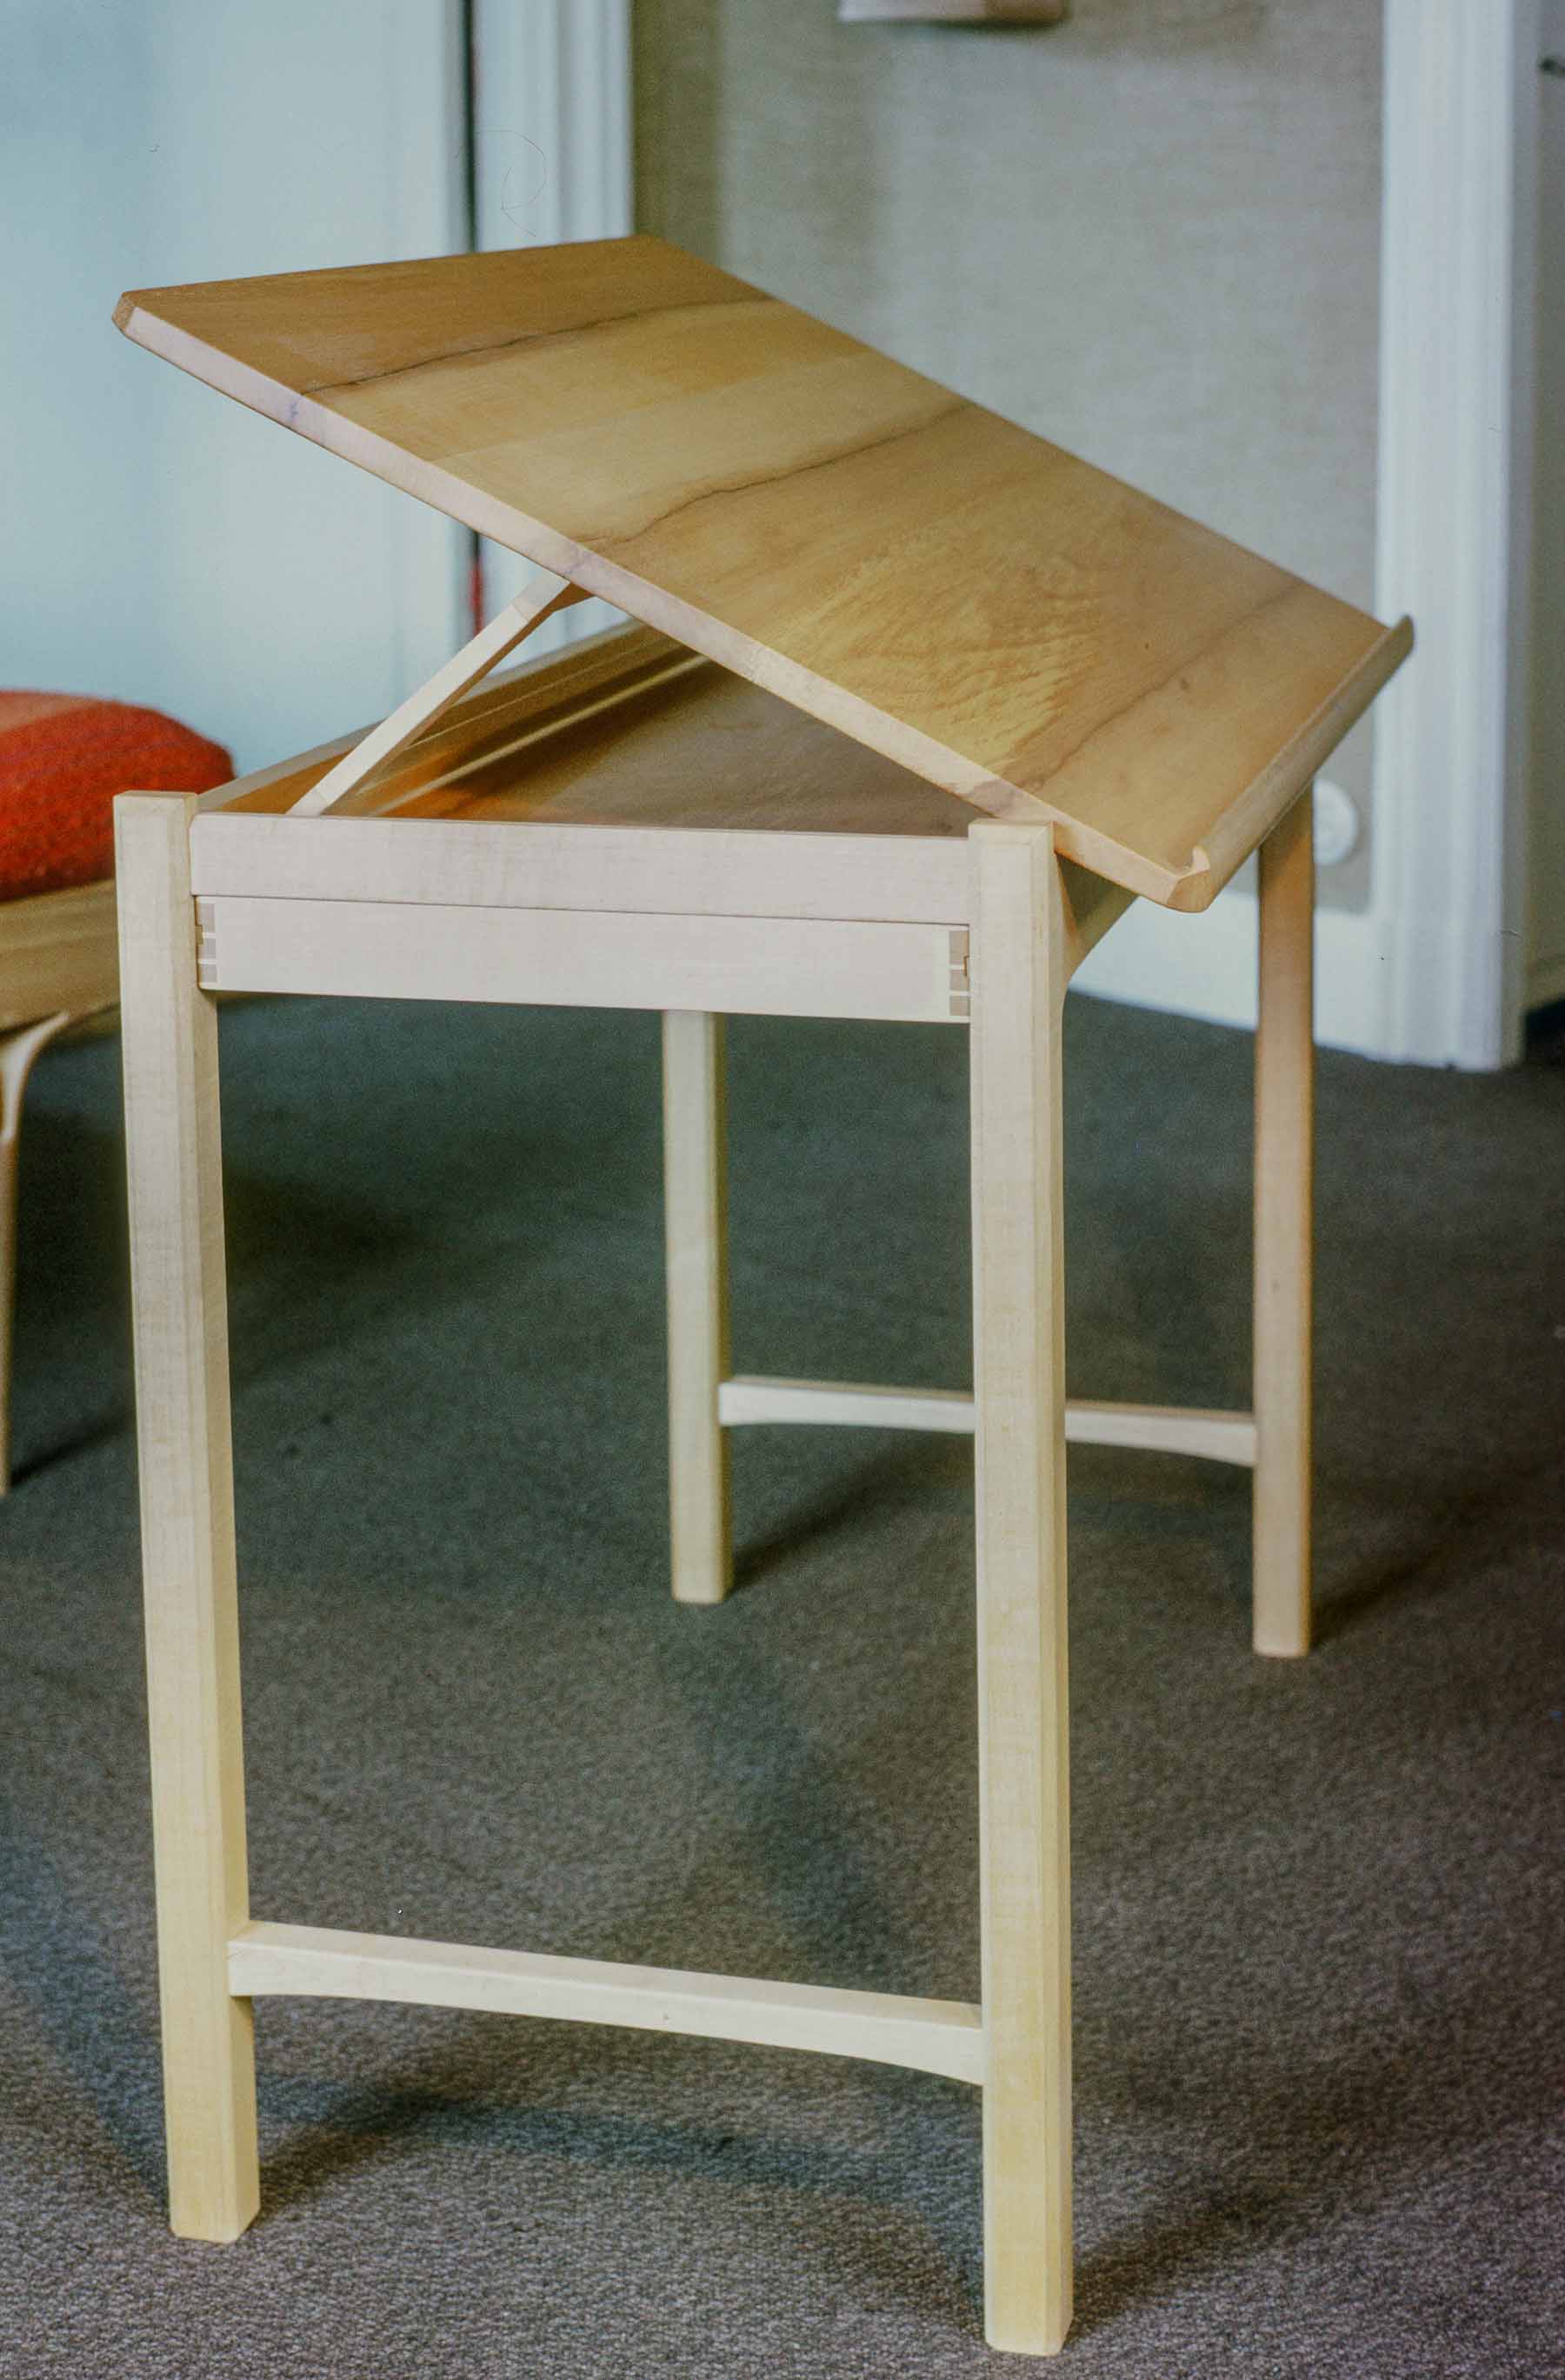 Reading-writing Table